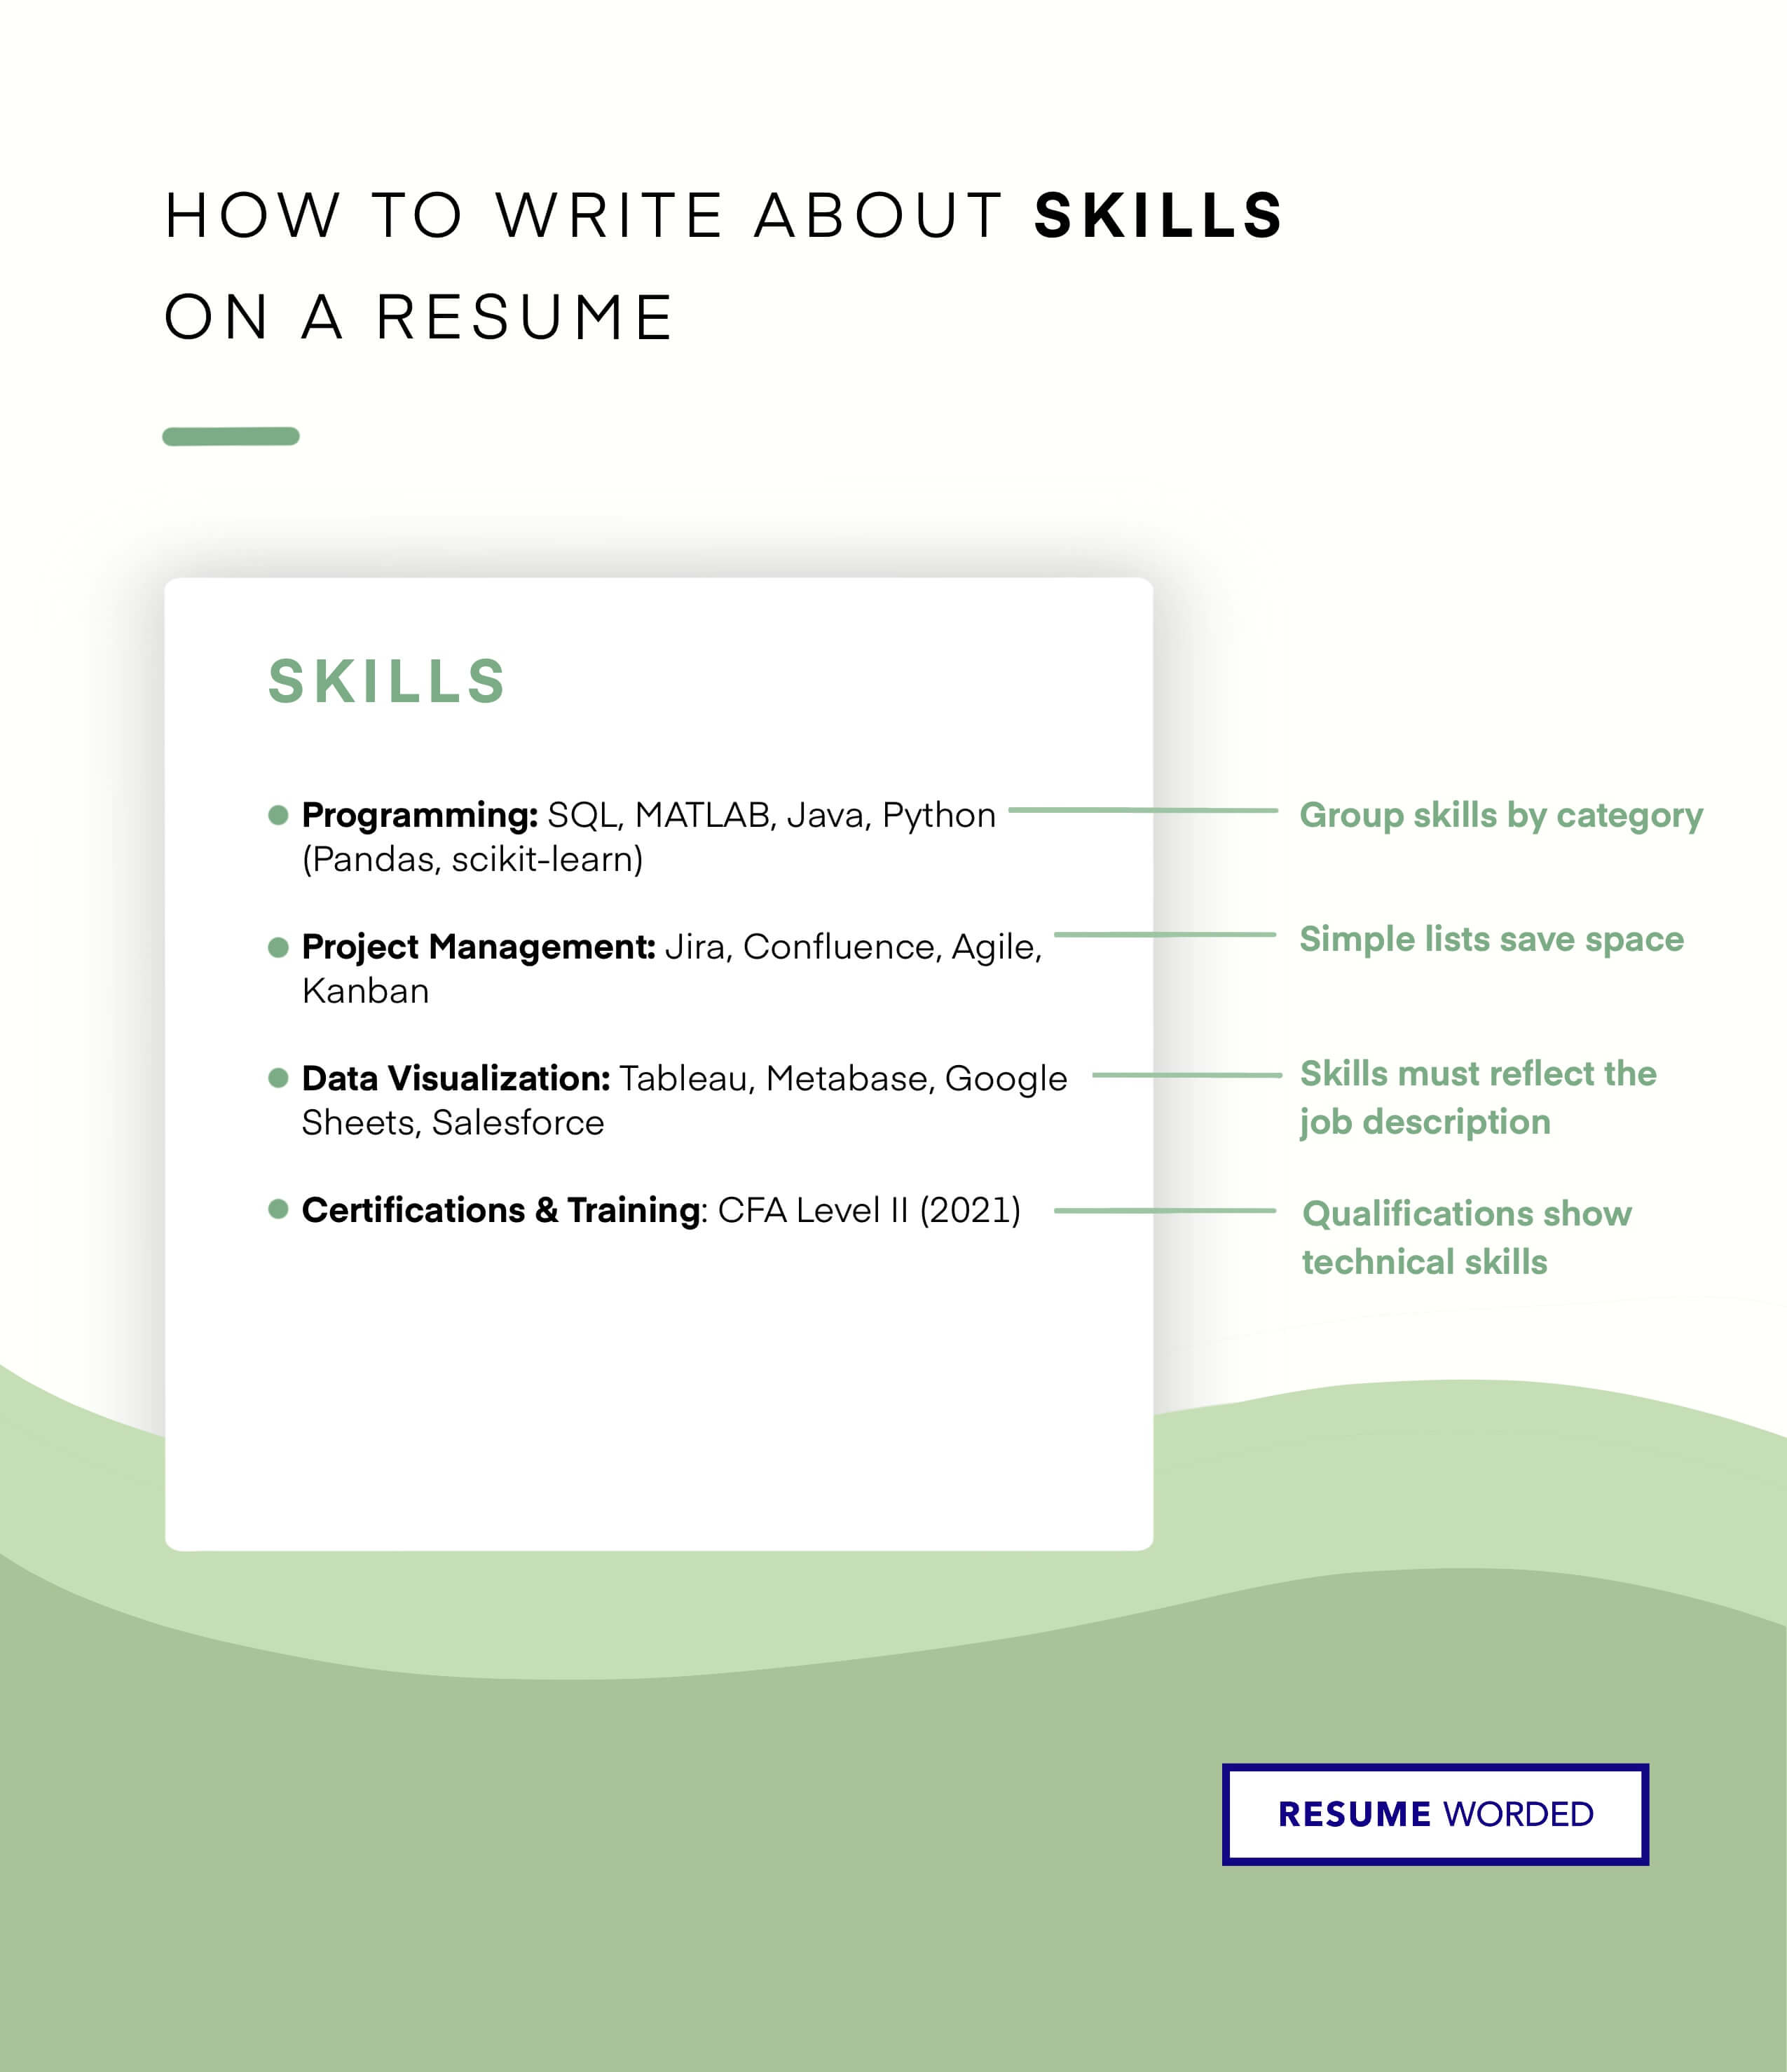 Feature your soft skills - Entry Level Human Resources (HR) CV